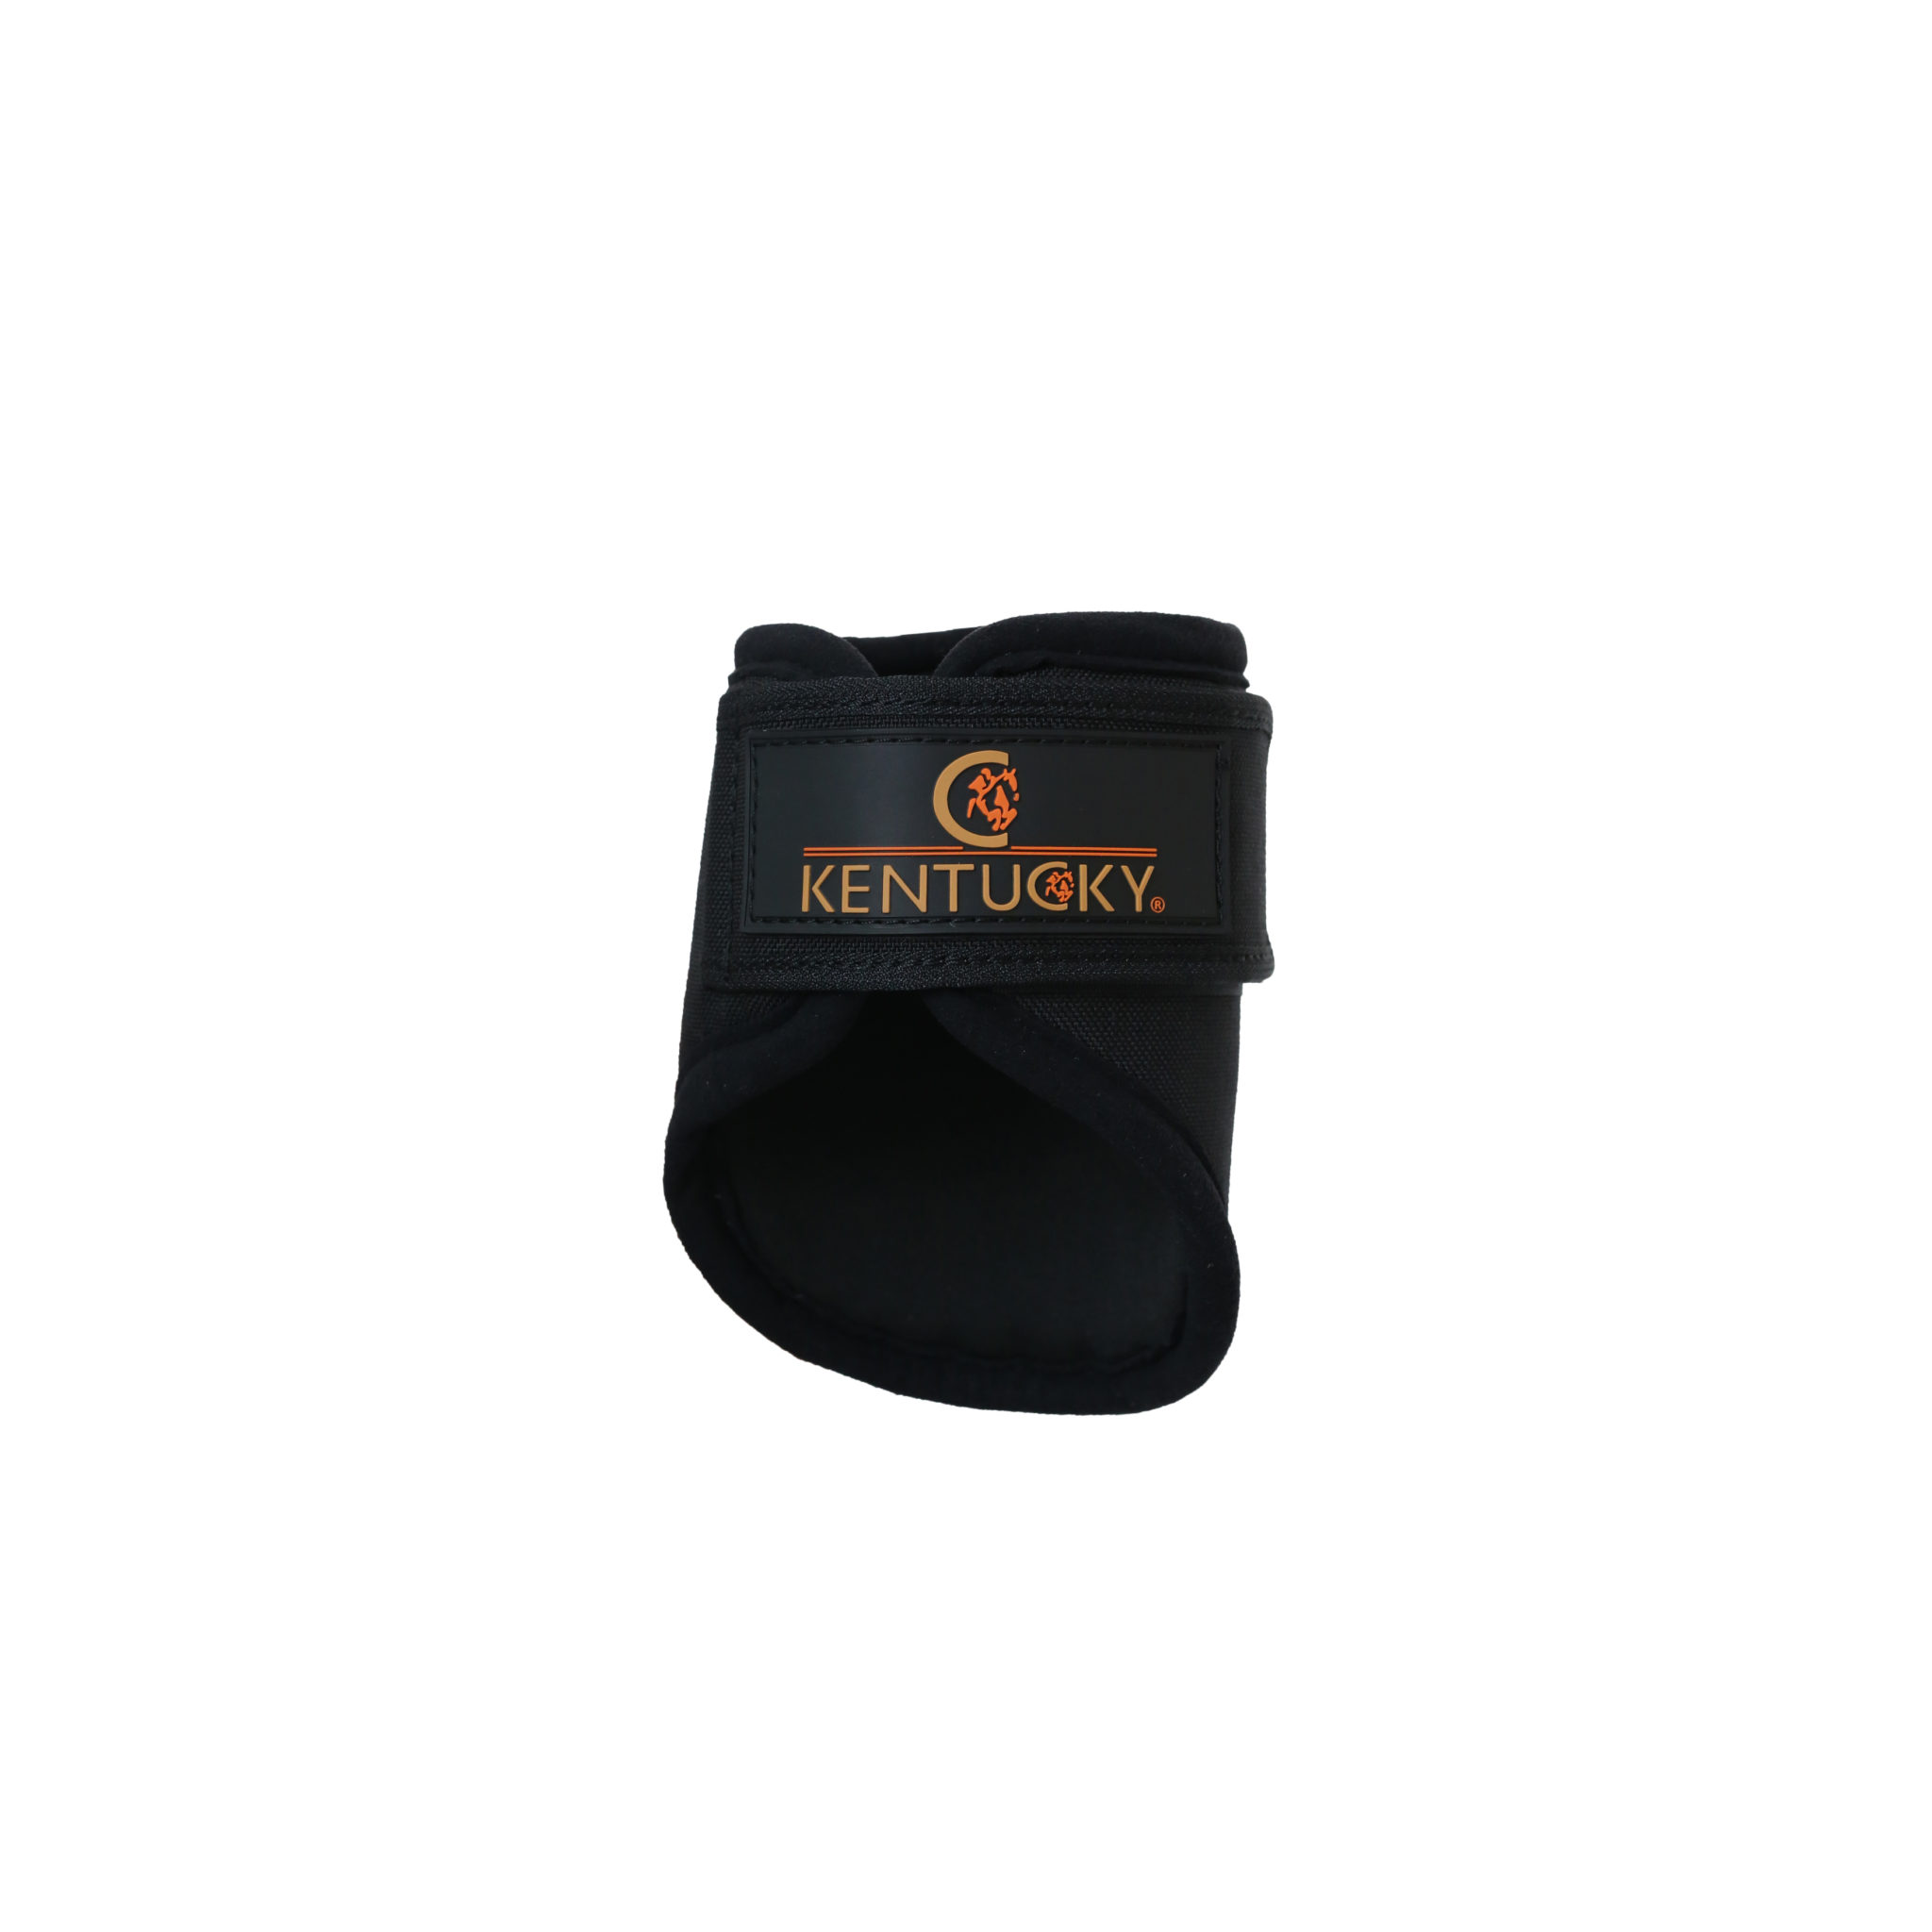 kentucky-turnout-boots-3d-spacer-hind-short